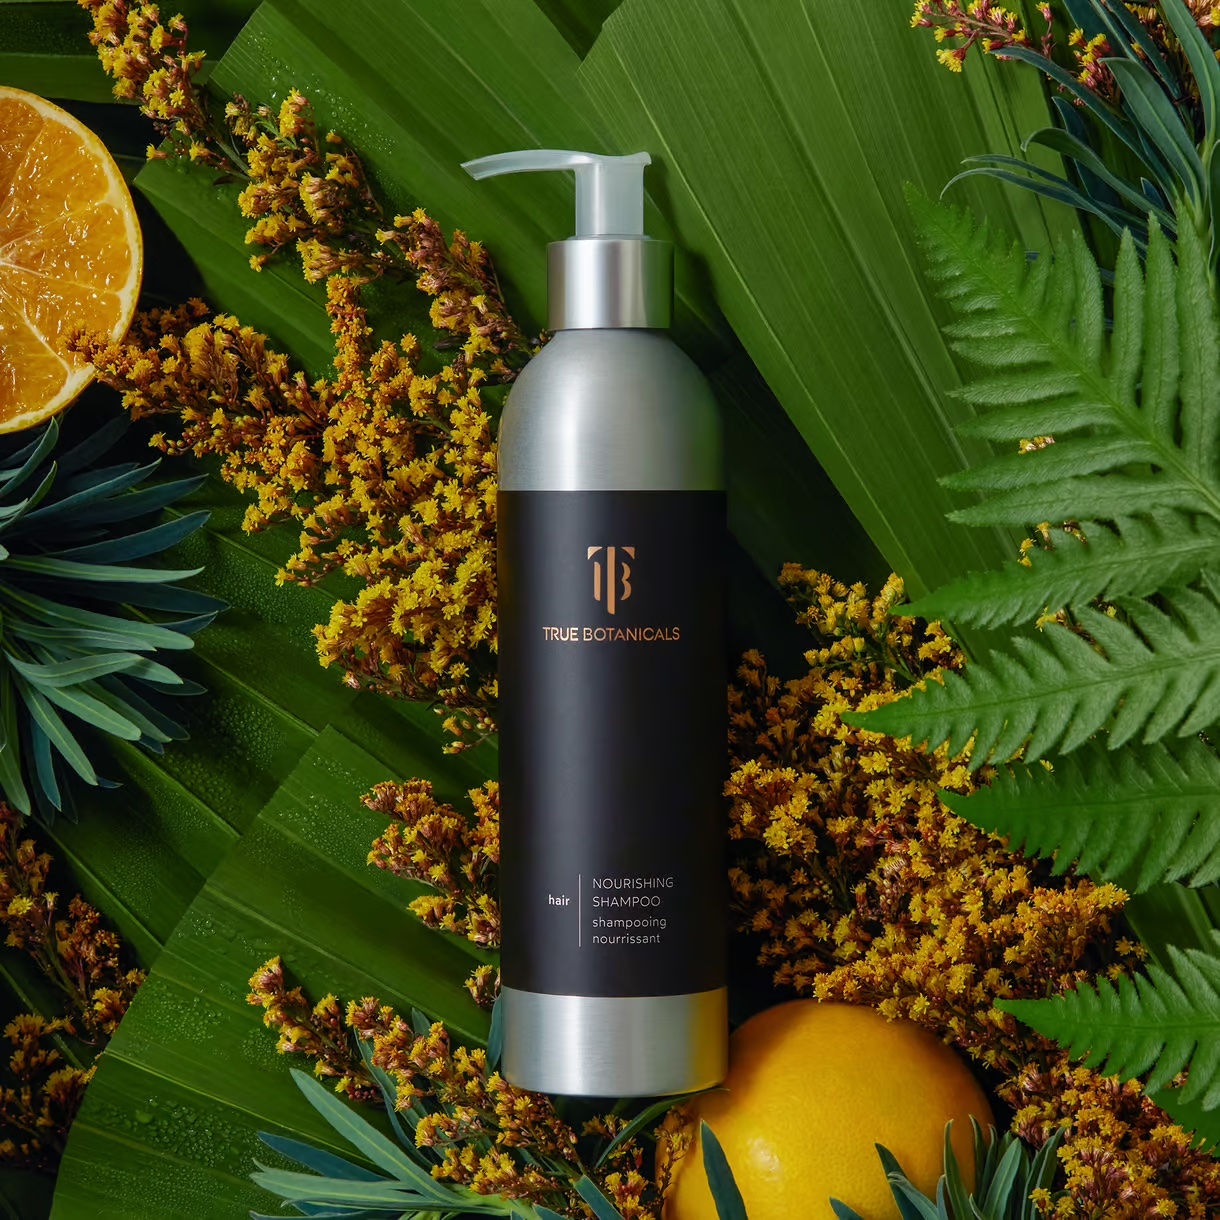 A bottle of true botanicals nourishing shampoo surrounded by citrus slices and yellow flowers against a backdrop of green leaves.